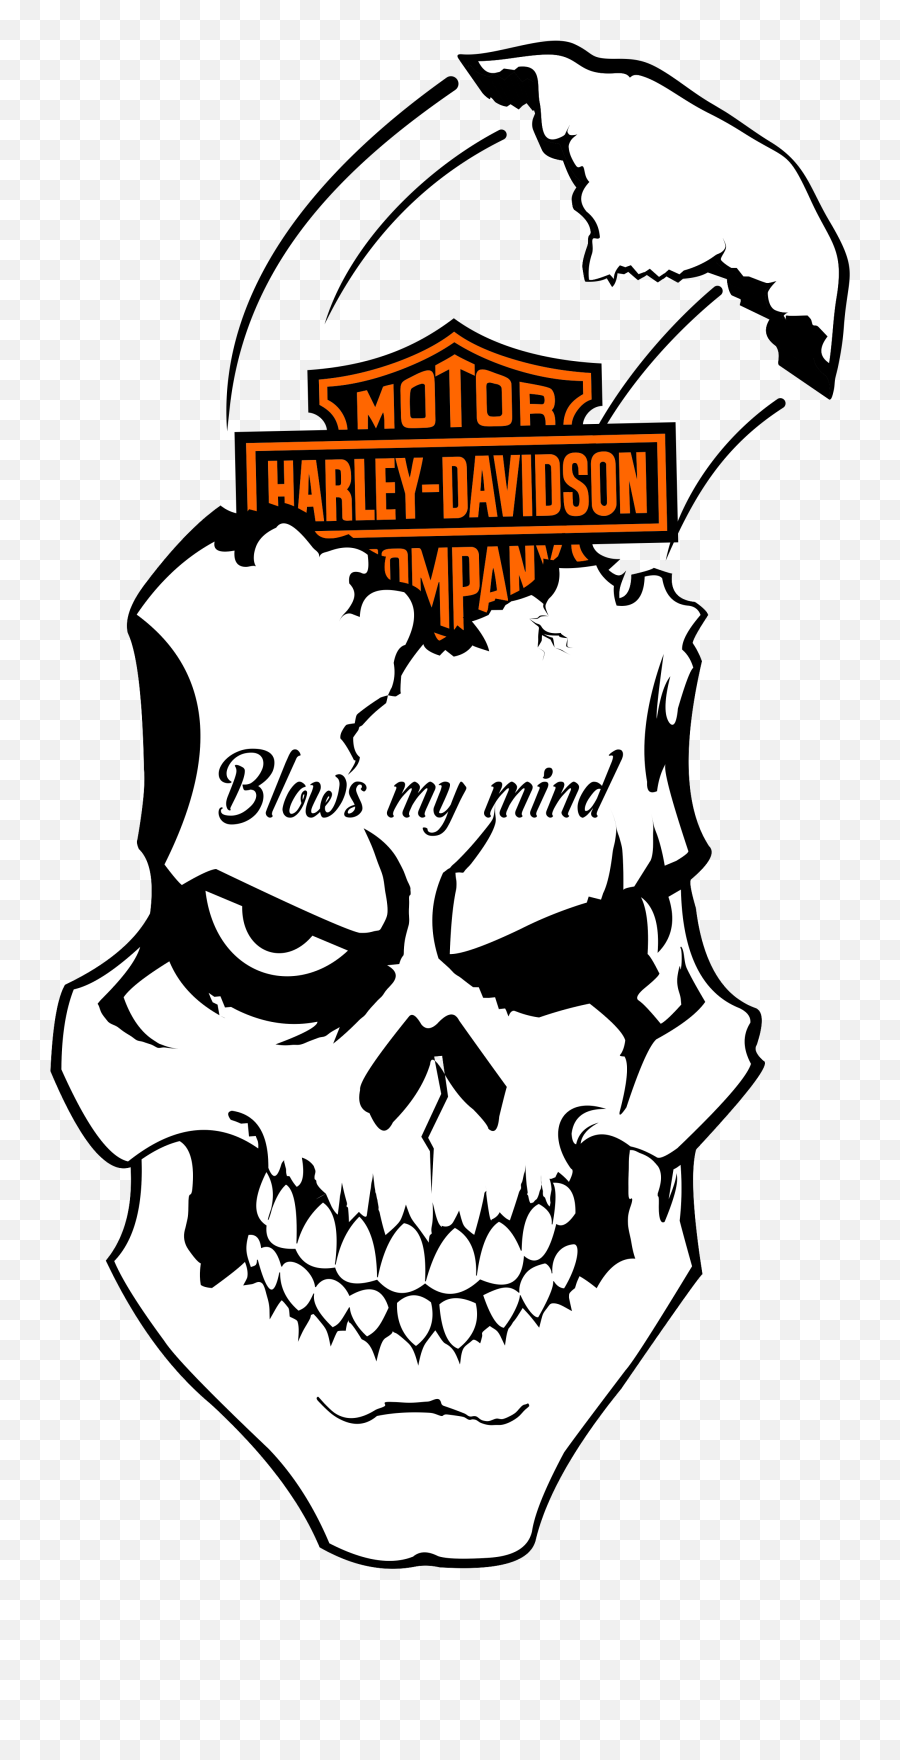 Free Harley Davidson Clipart Black And White Download Free - Logo Clip Art Logo Harley Davidson Emoji,Harley Davidson Clipart